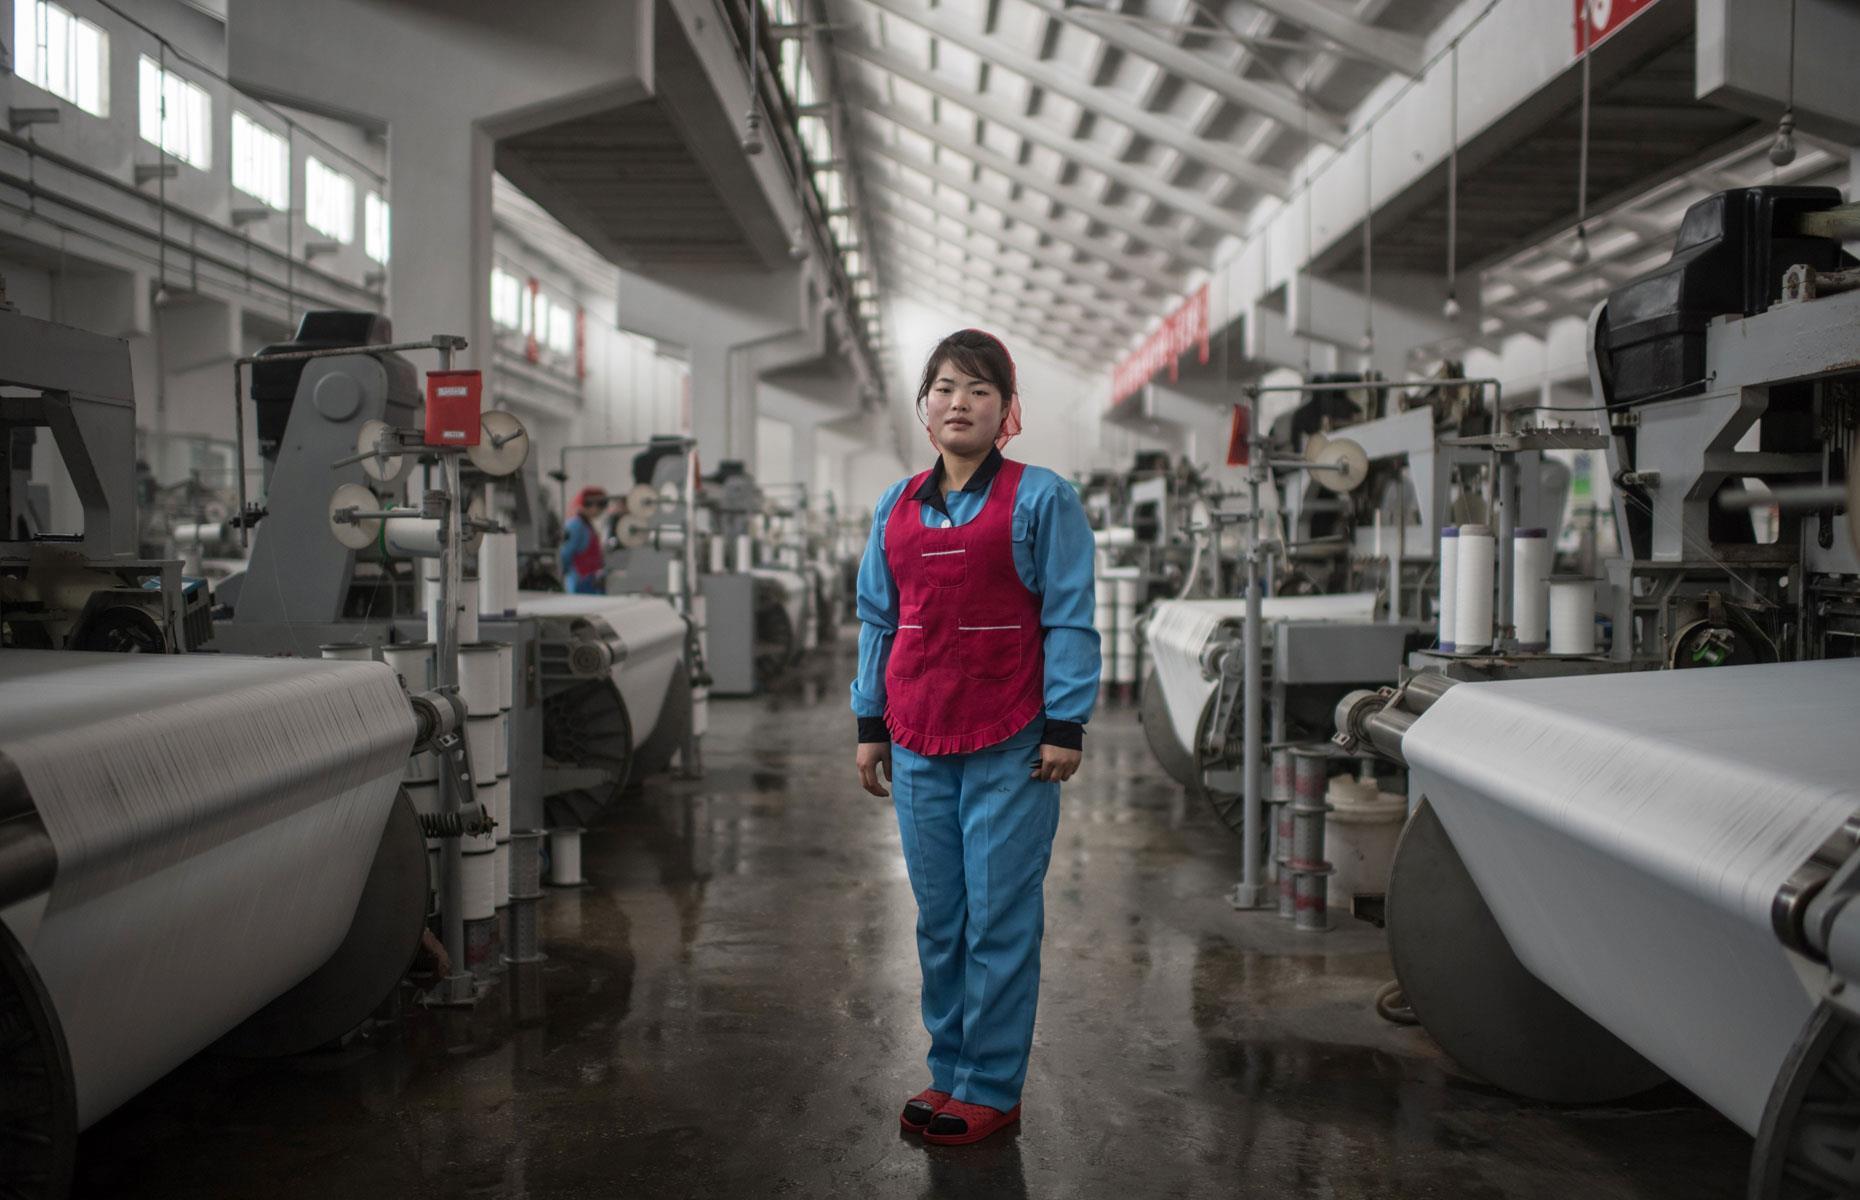 Working lives in the Hermit Kingdom